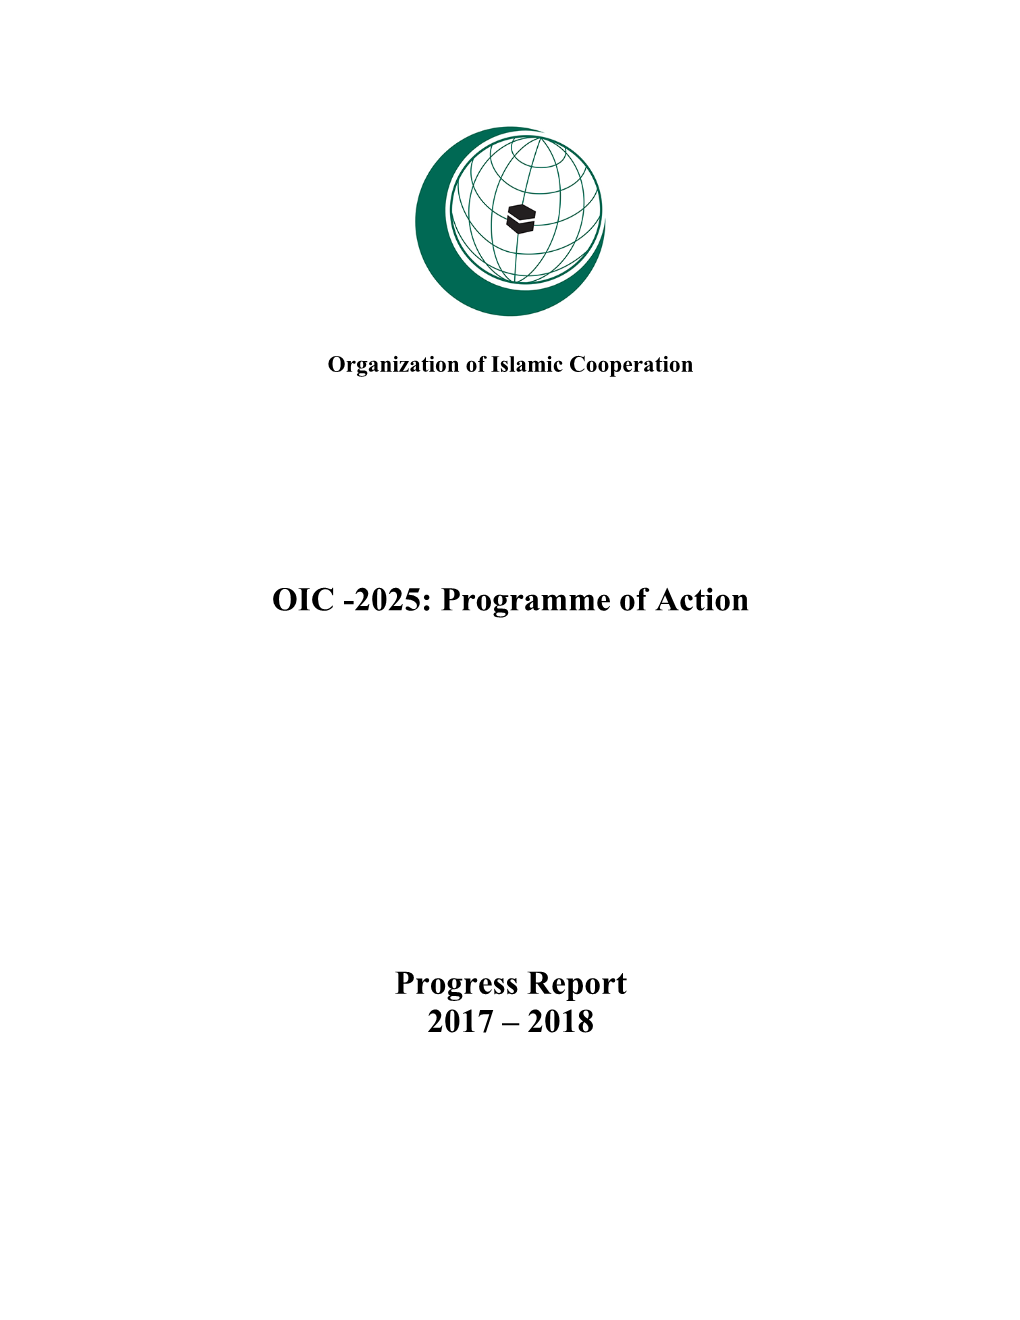 OIC -2025: Programme of Action Progress Report 2017 – 2018